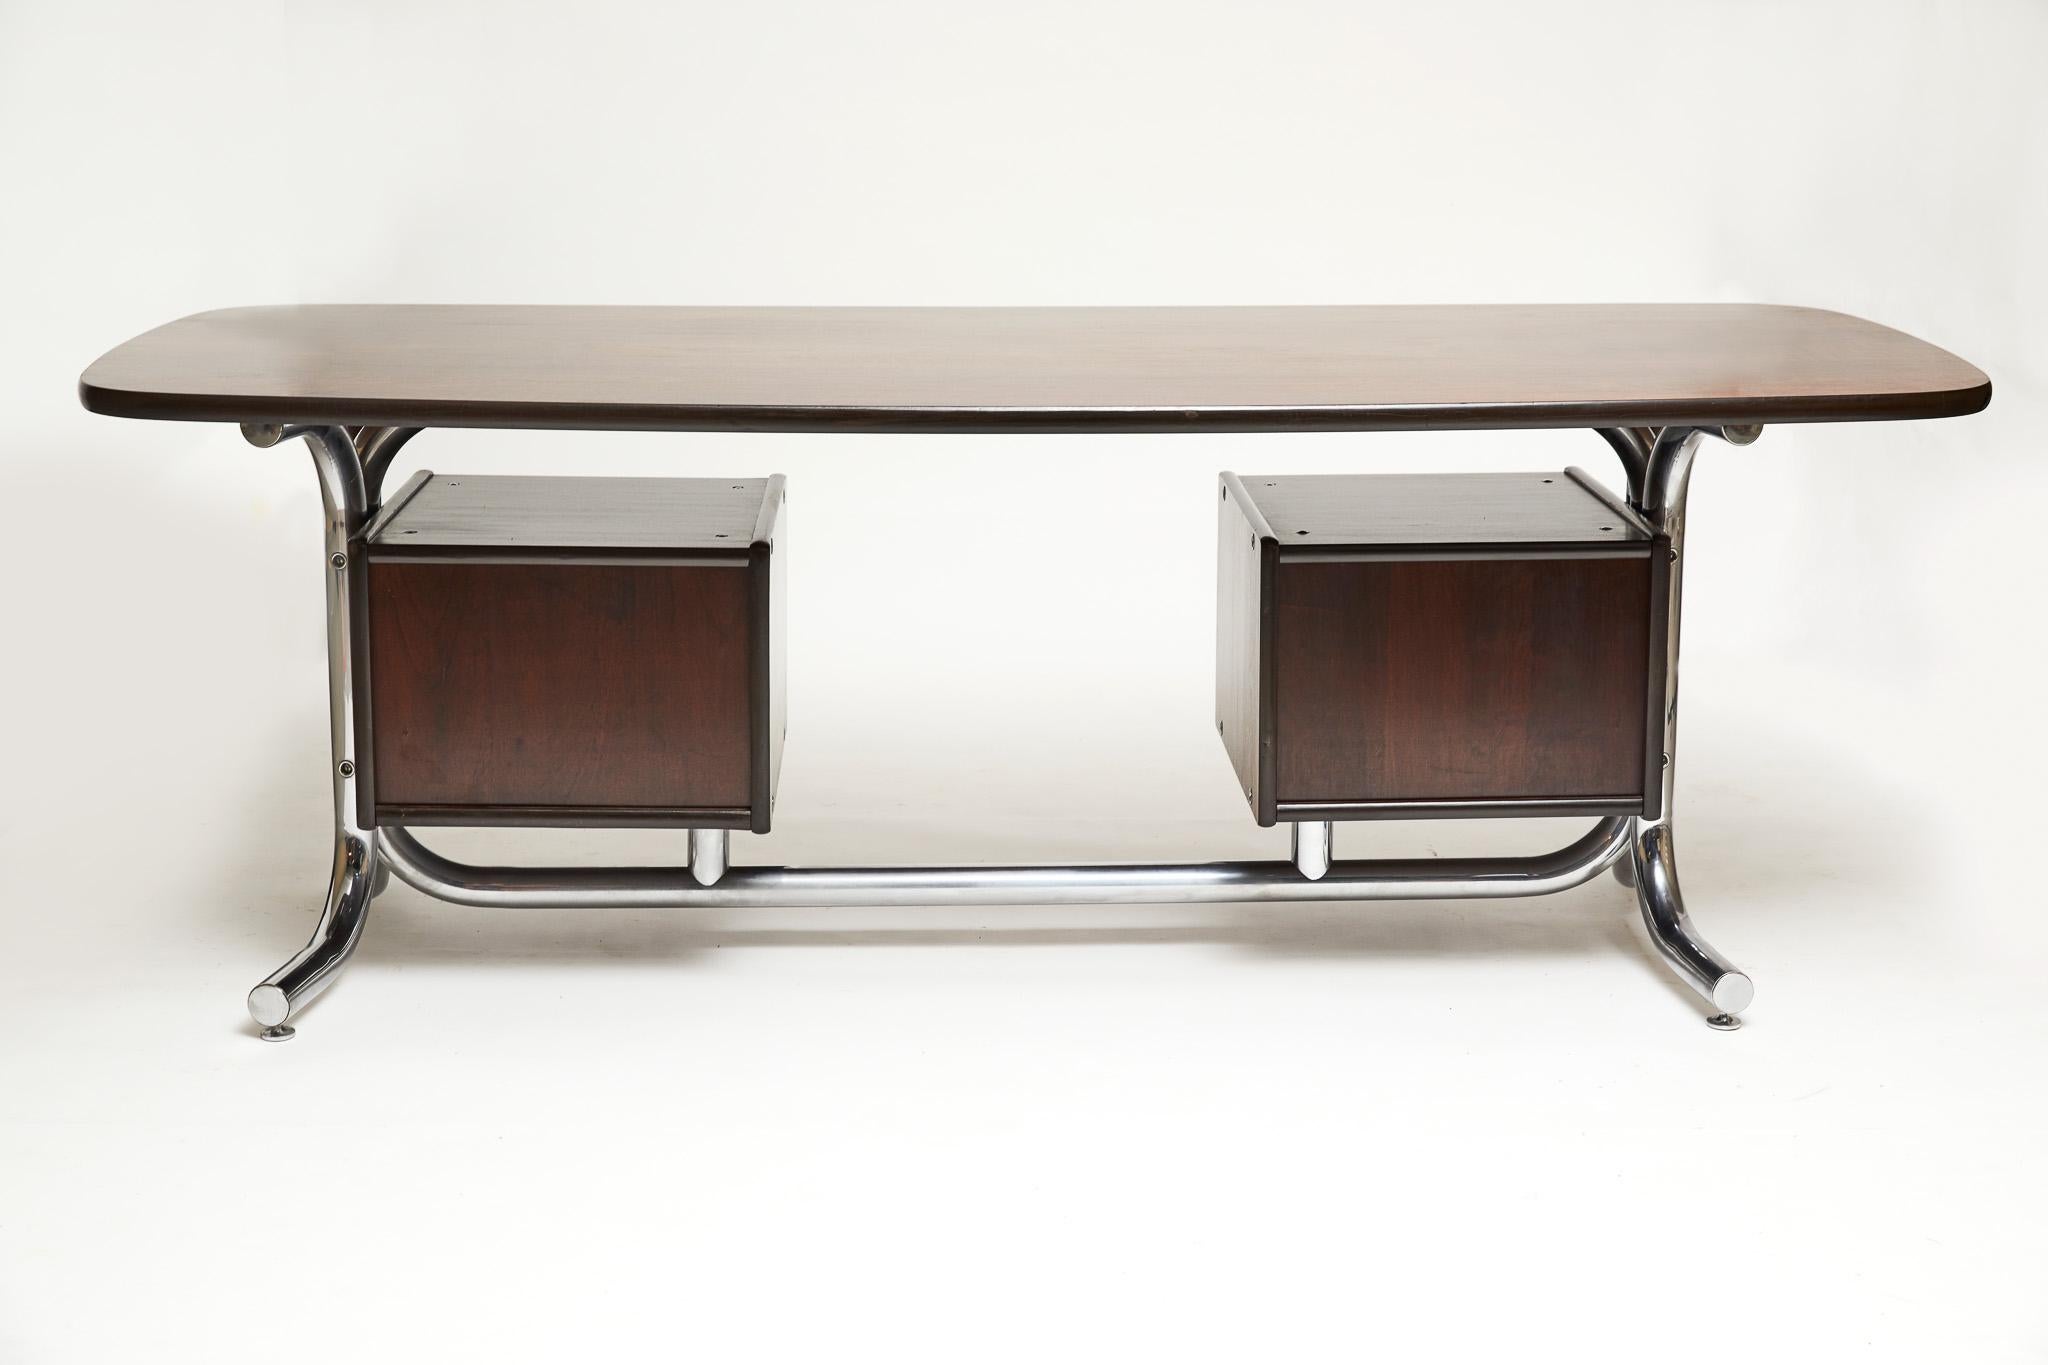 1970's Midcentury Modern Desk in Tubular Chrome & Wood Leaf by Geraldo Barros In Good Condition For Sale In New York, NY